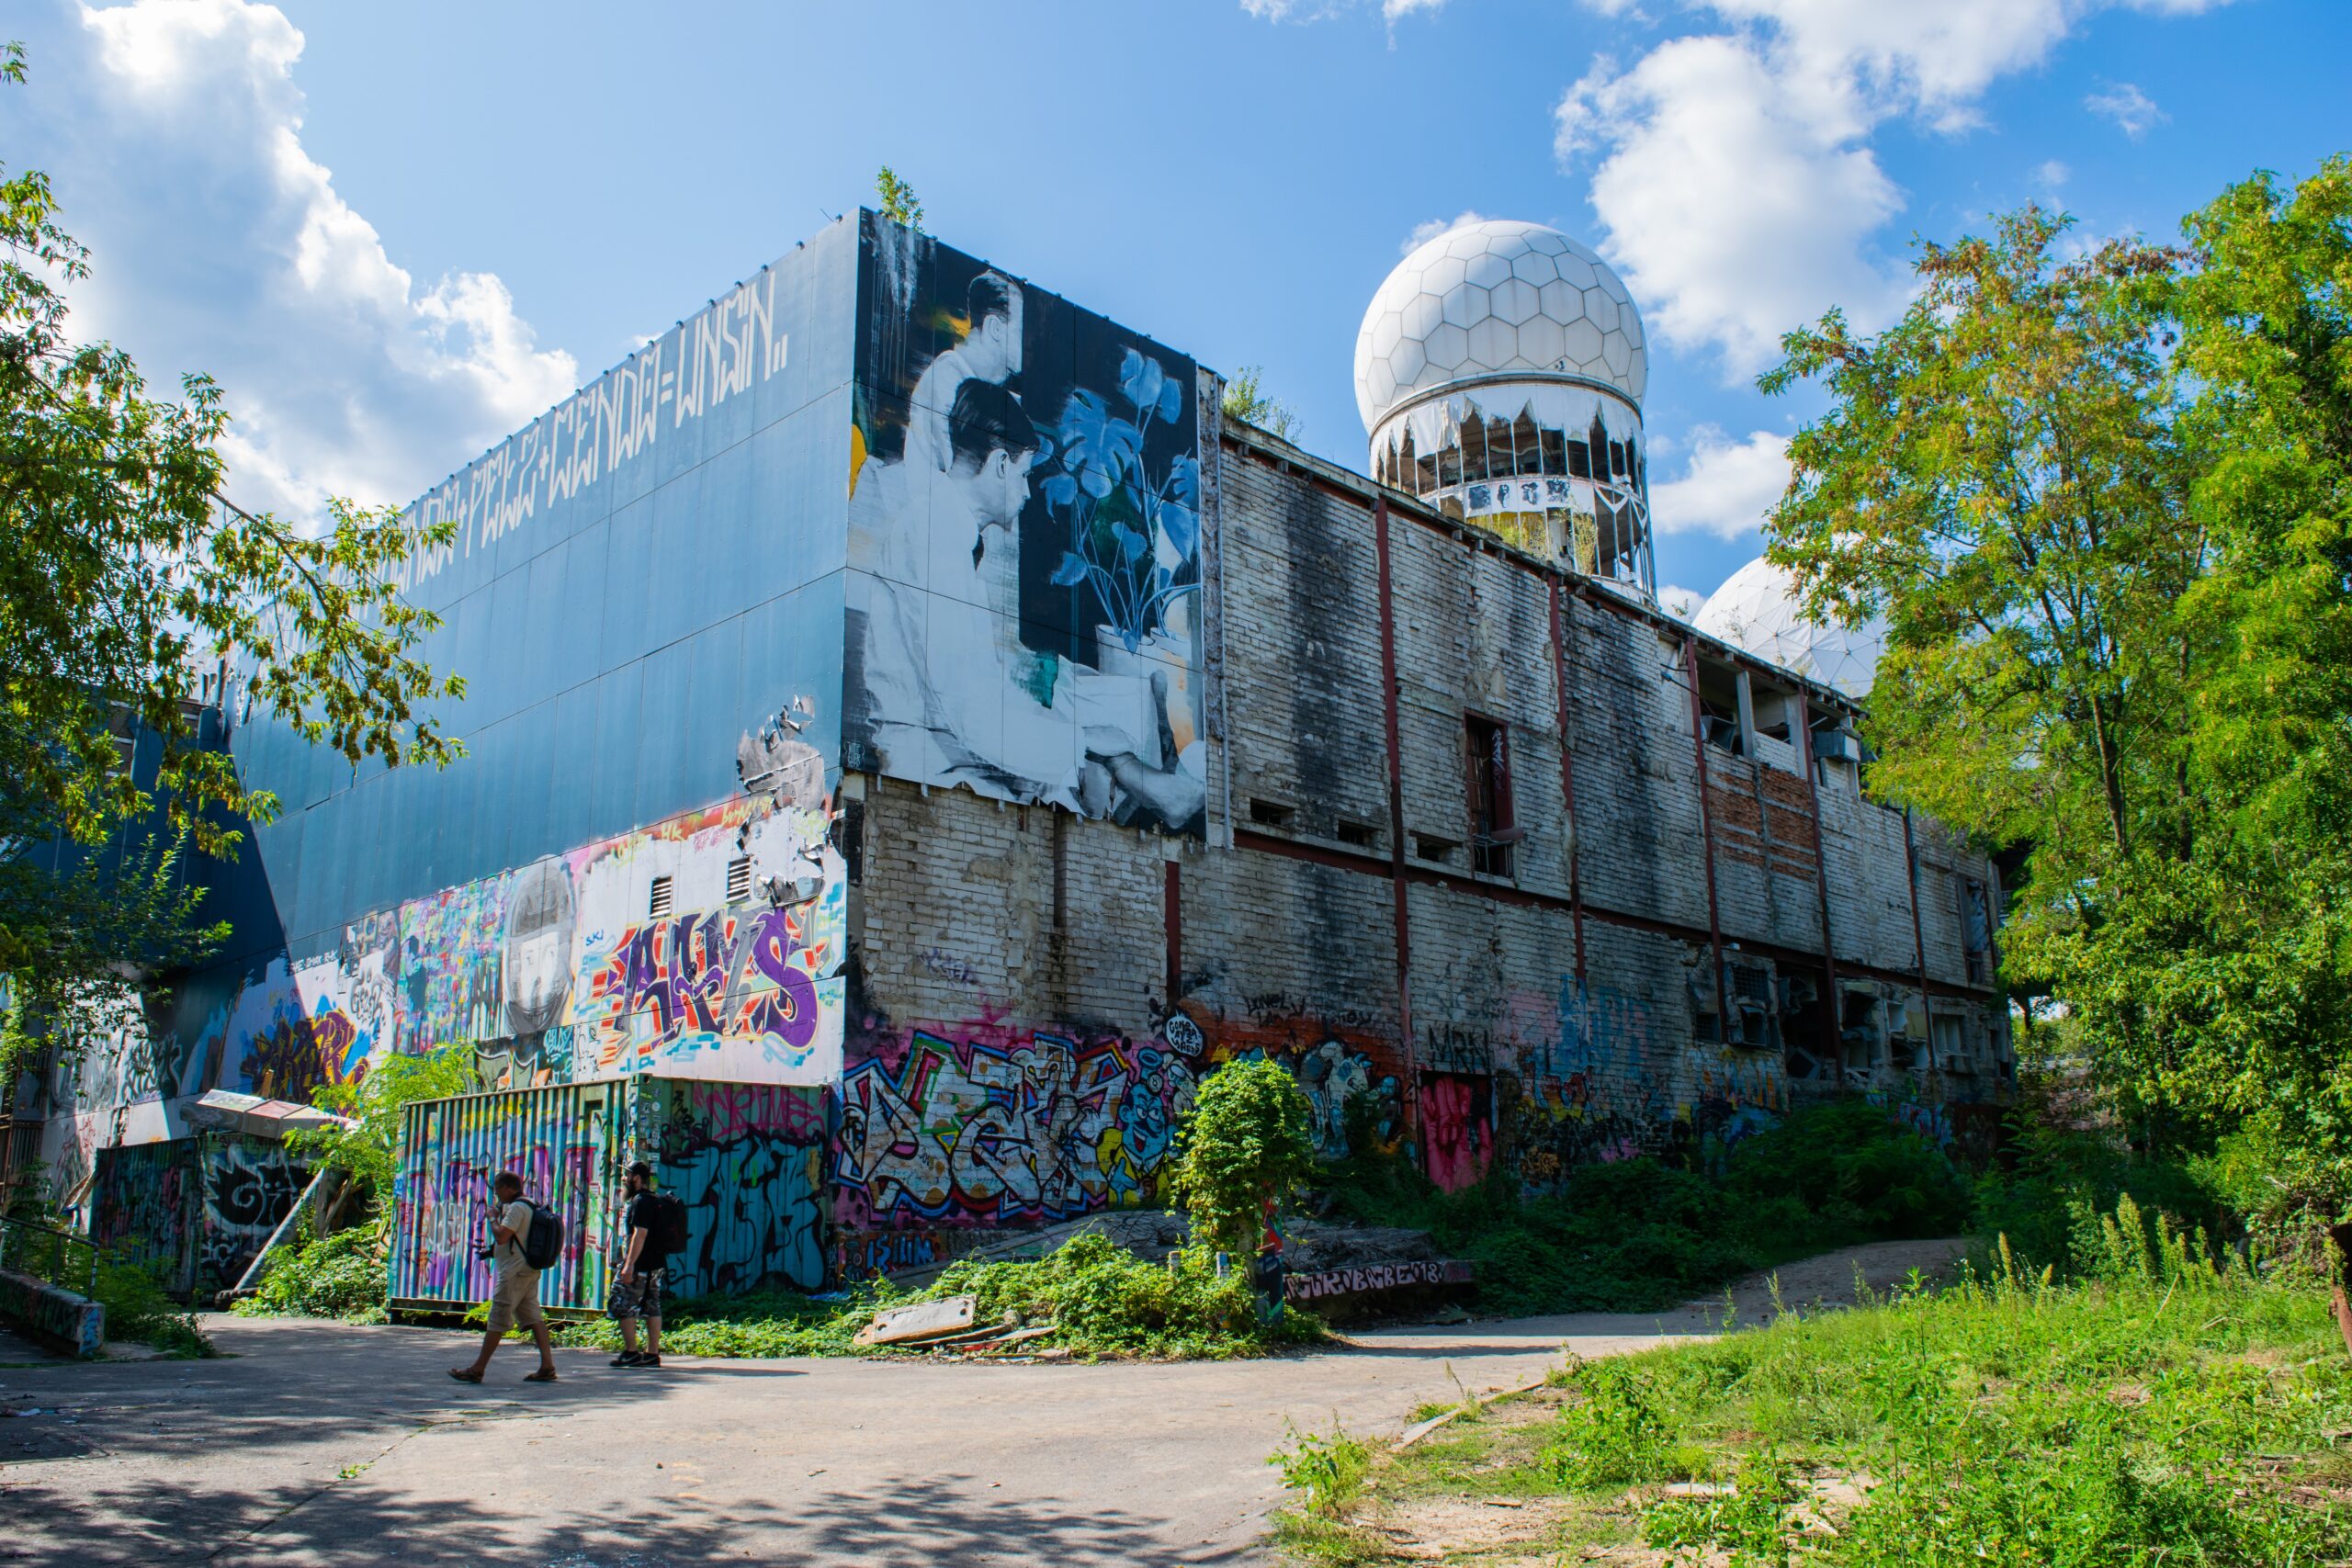 The Teufelsberg is one of Berlin hidden gems and offers a great view of the city.